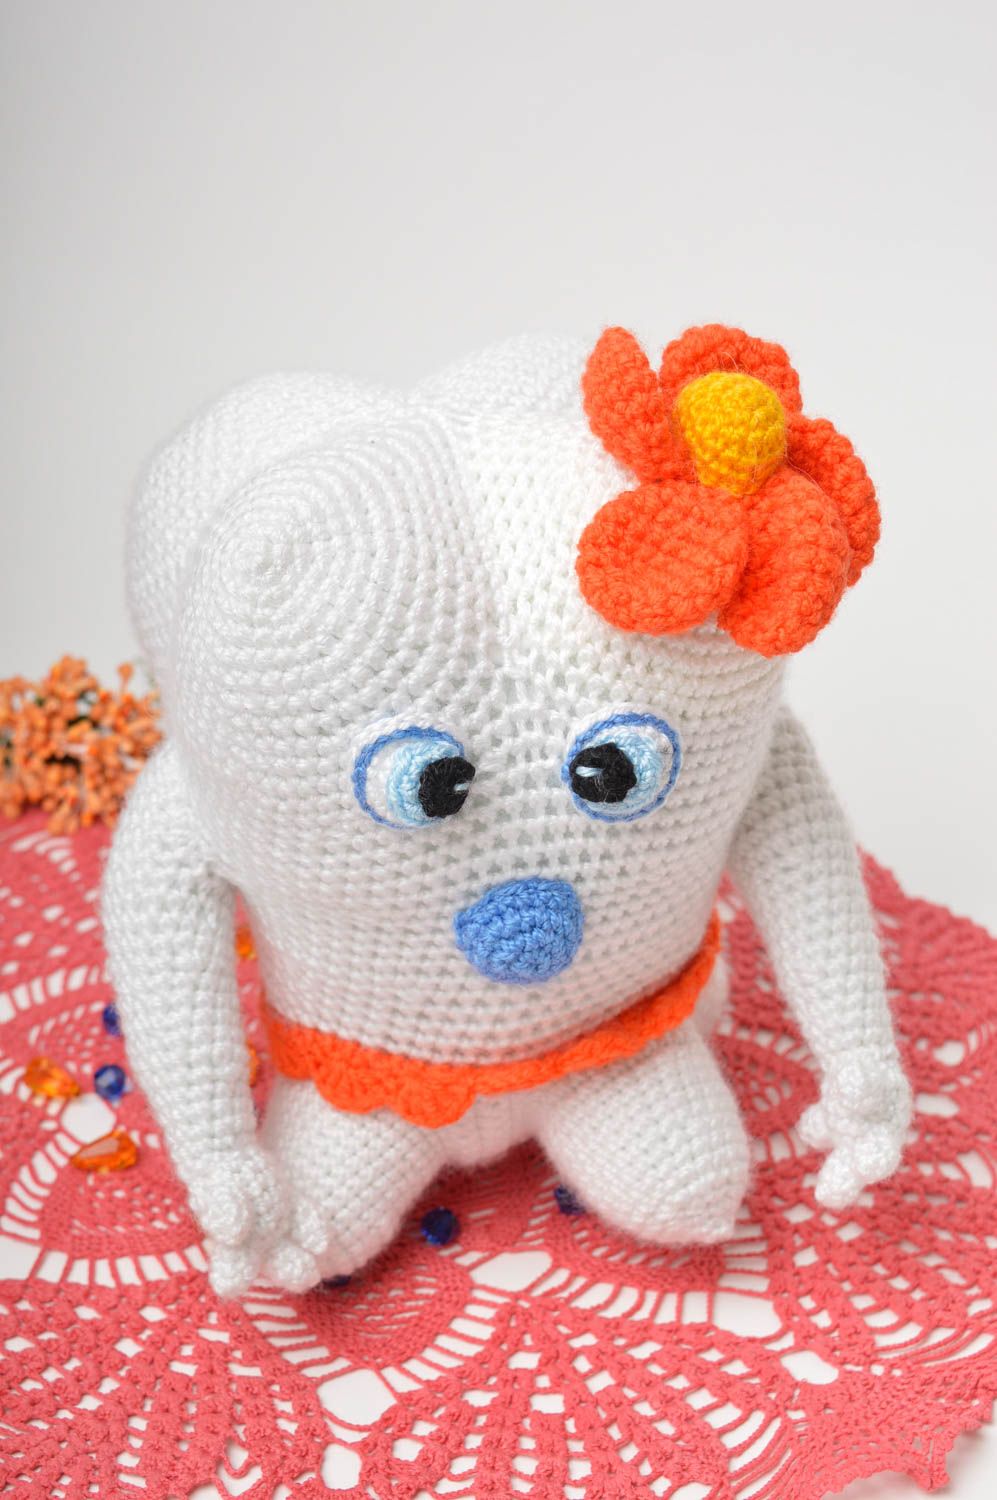 Handmade toy crochet toy for children unusual gift decorative use only photo 1